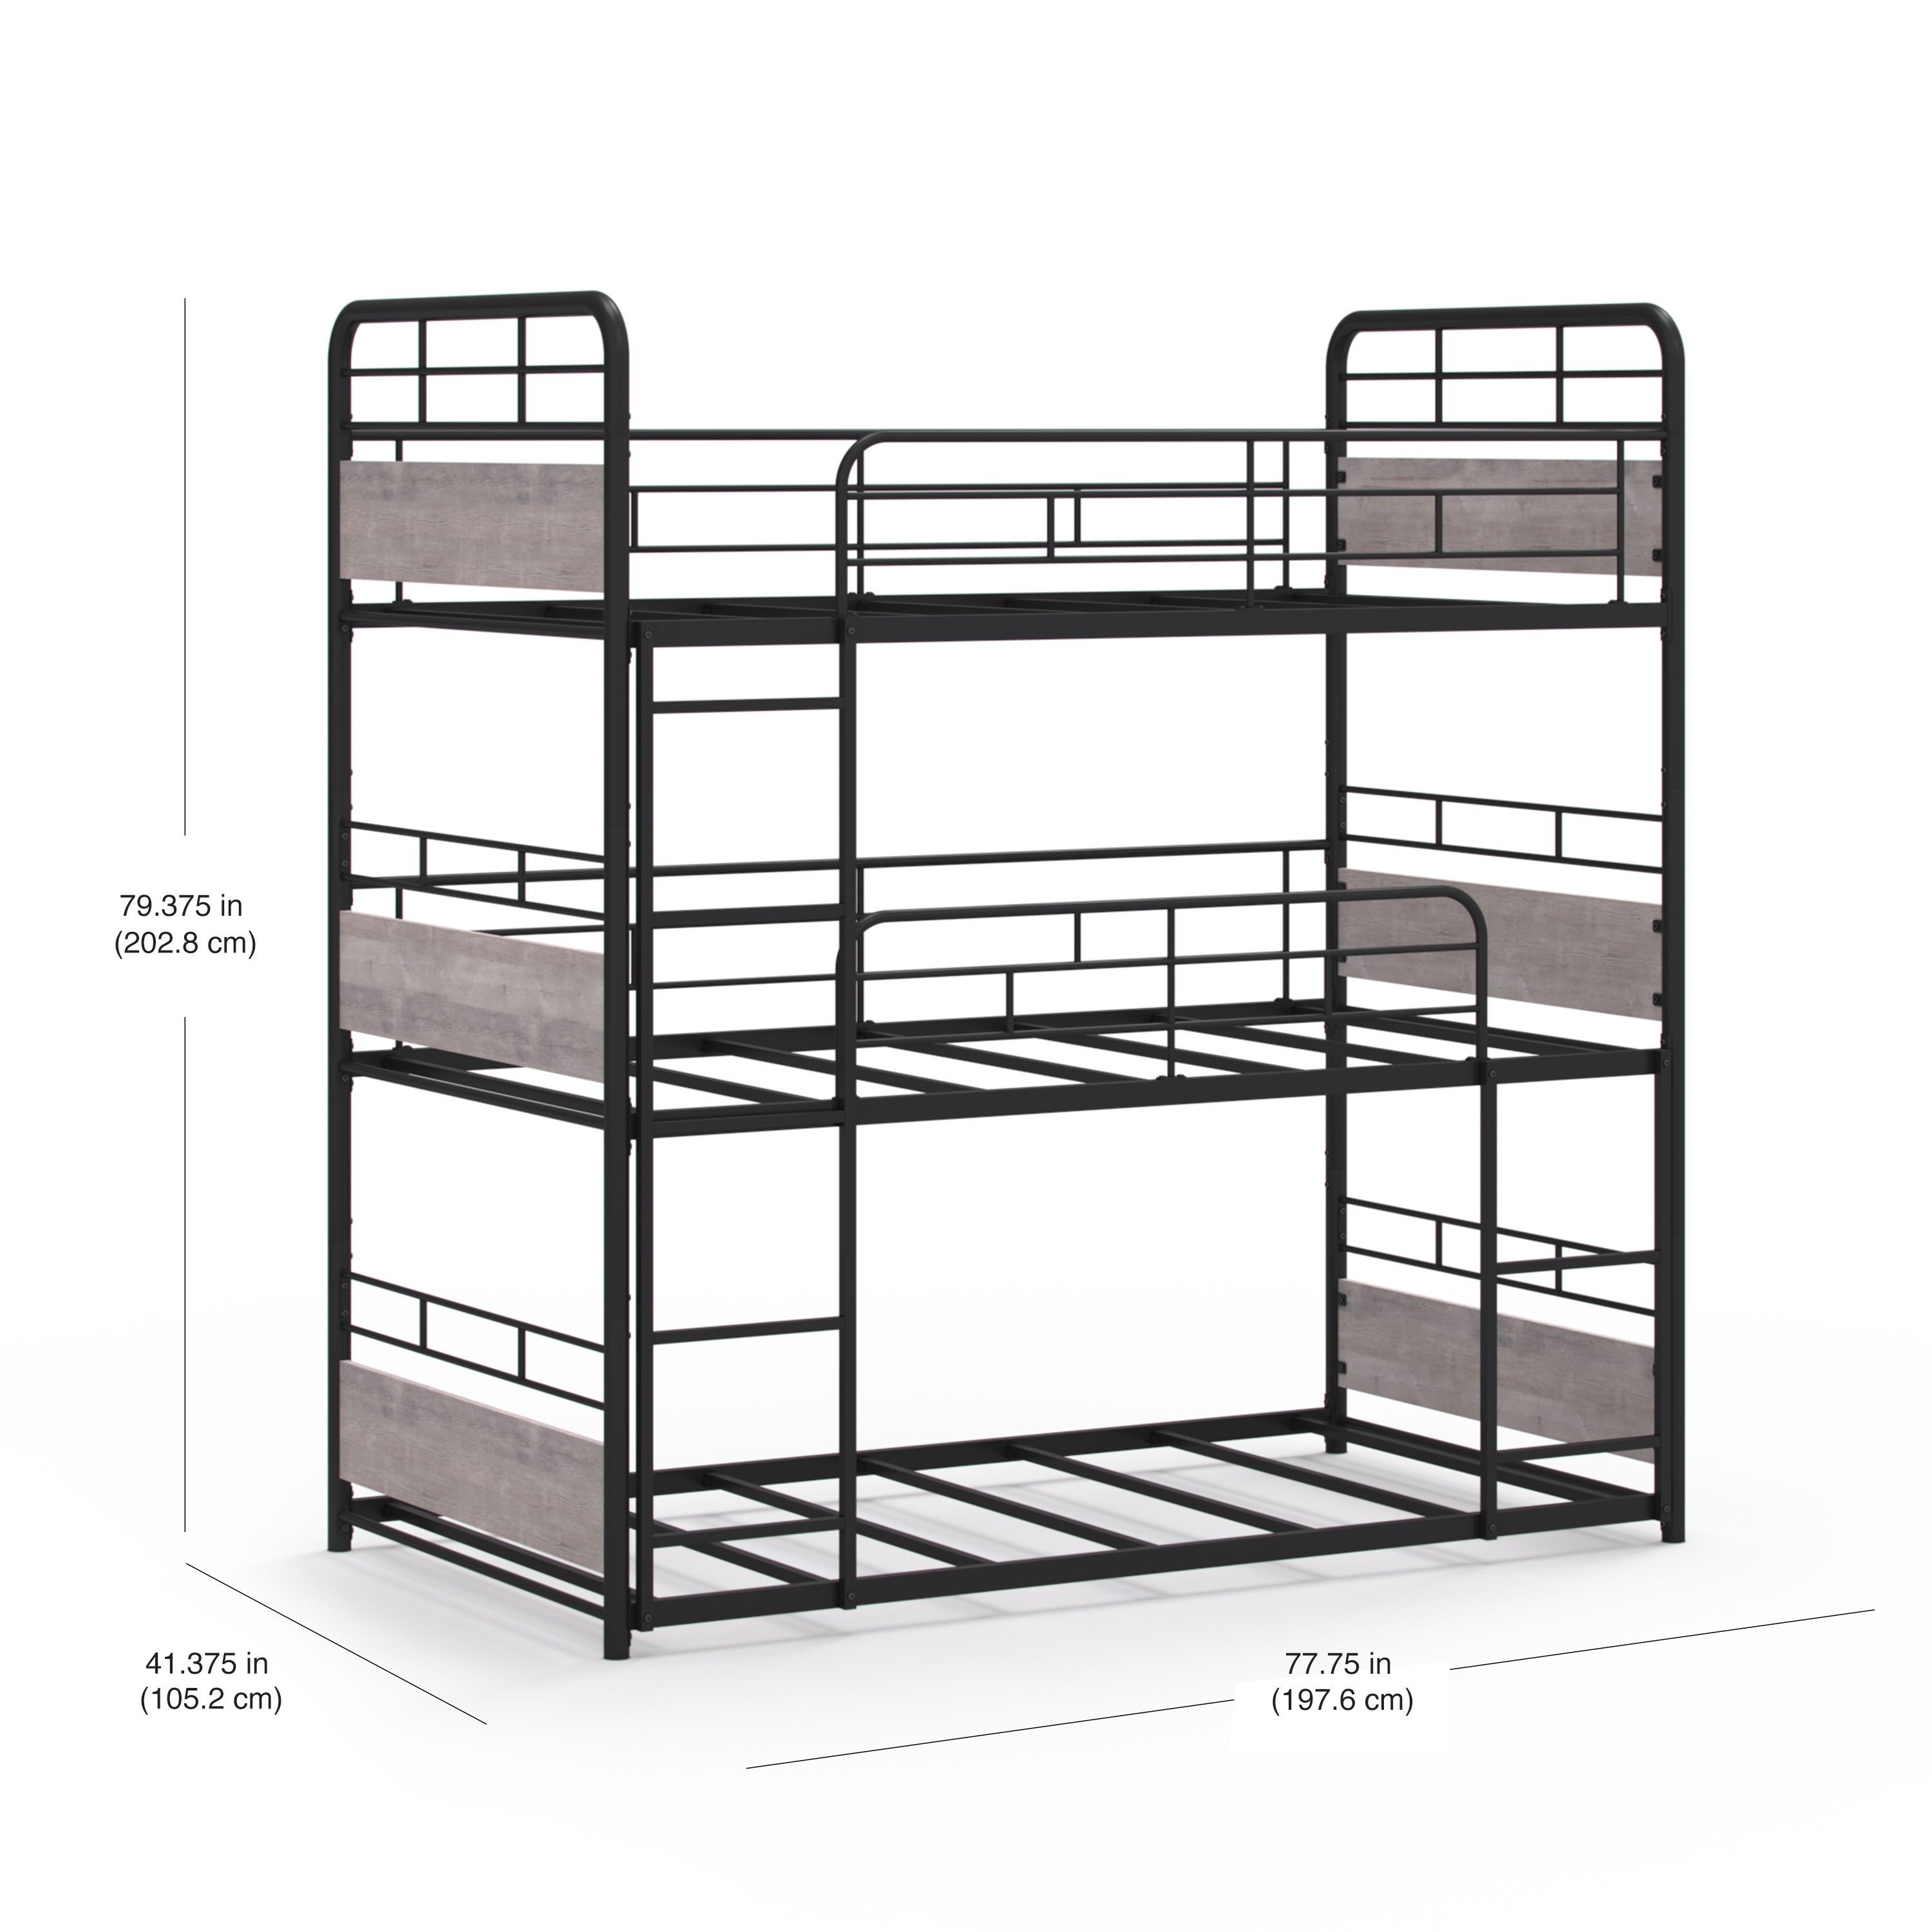 Better Homes & Gardens Anniston Convertible Black Metal Triple Twin Bunk Bed, Gray Wood Accents - image 15 of 26